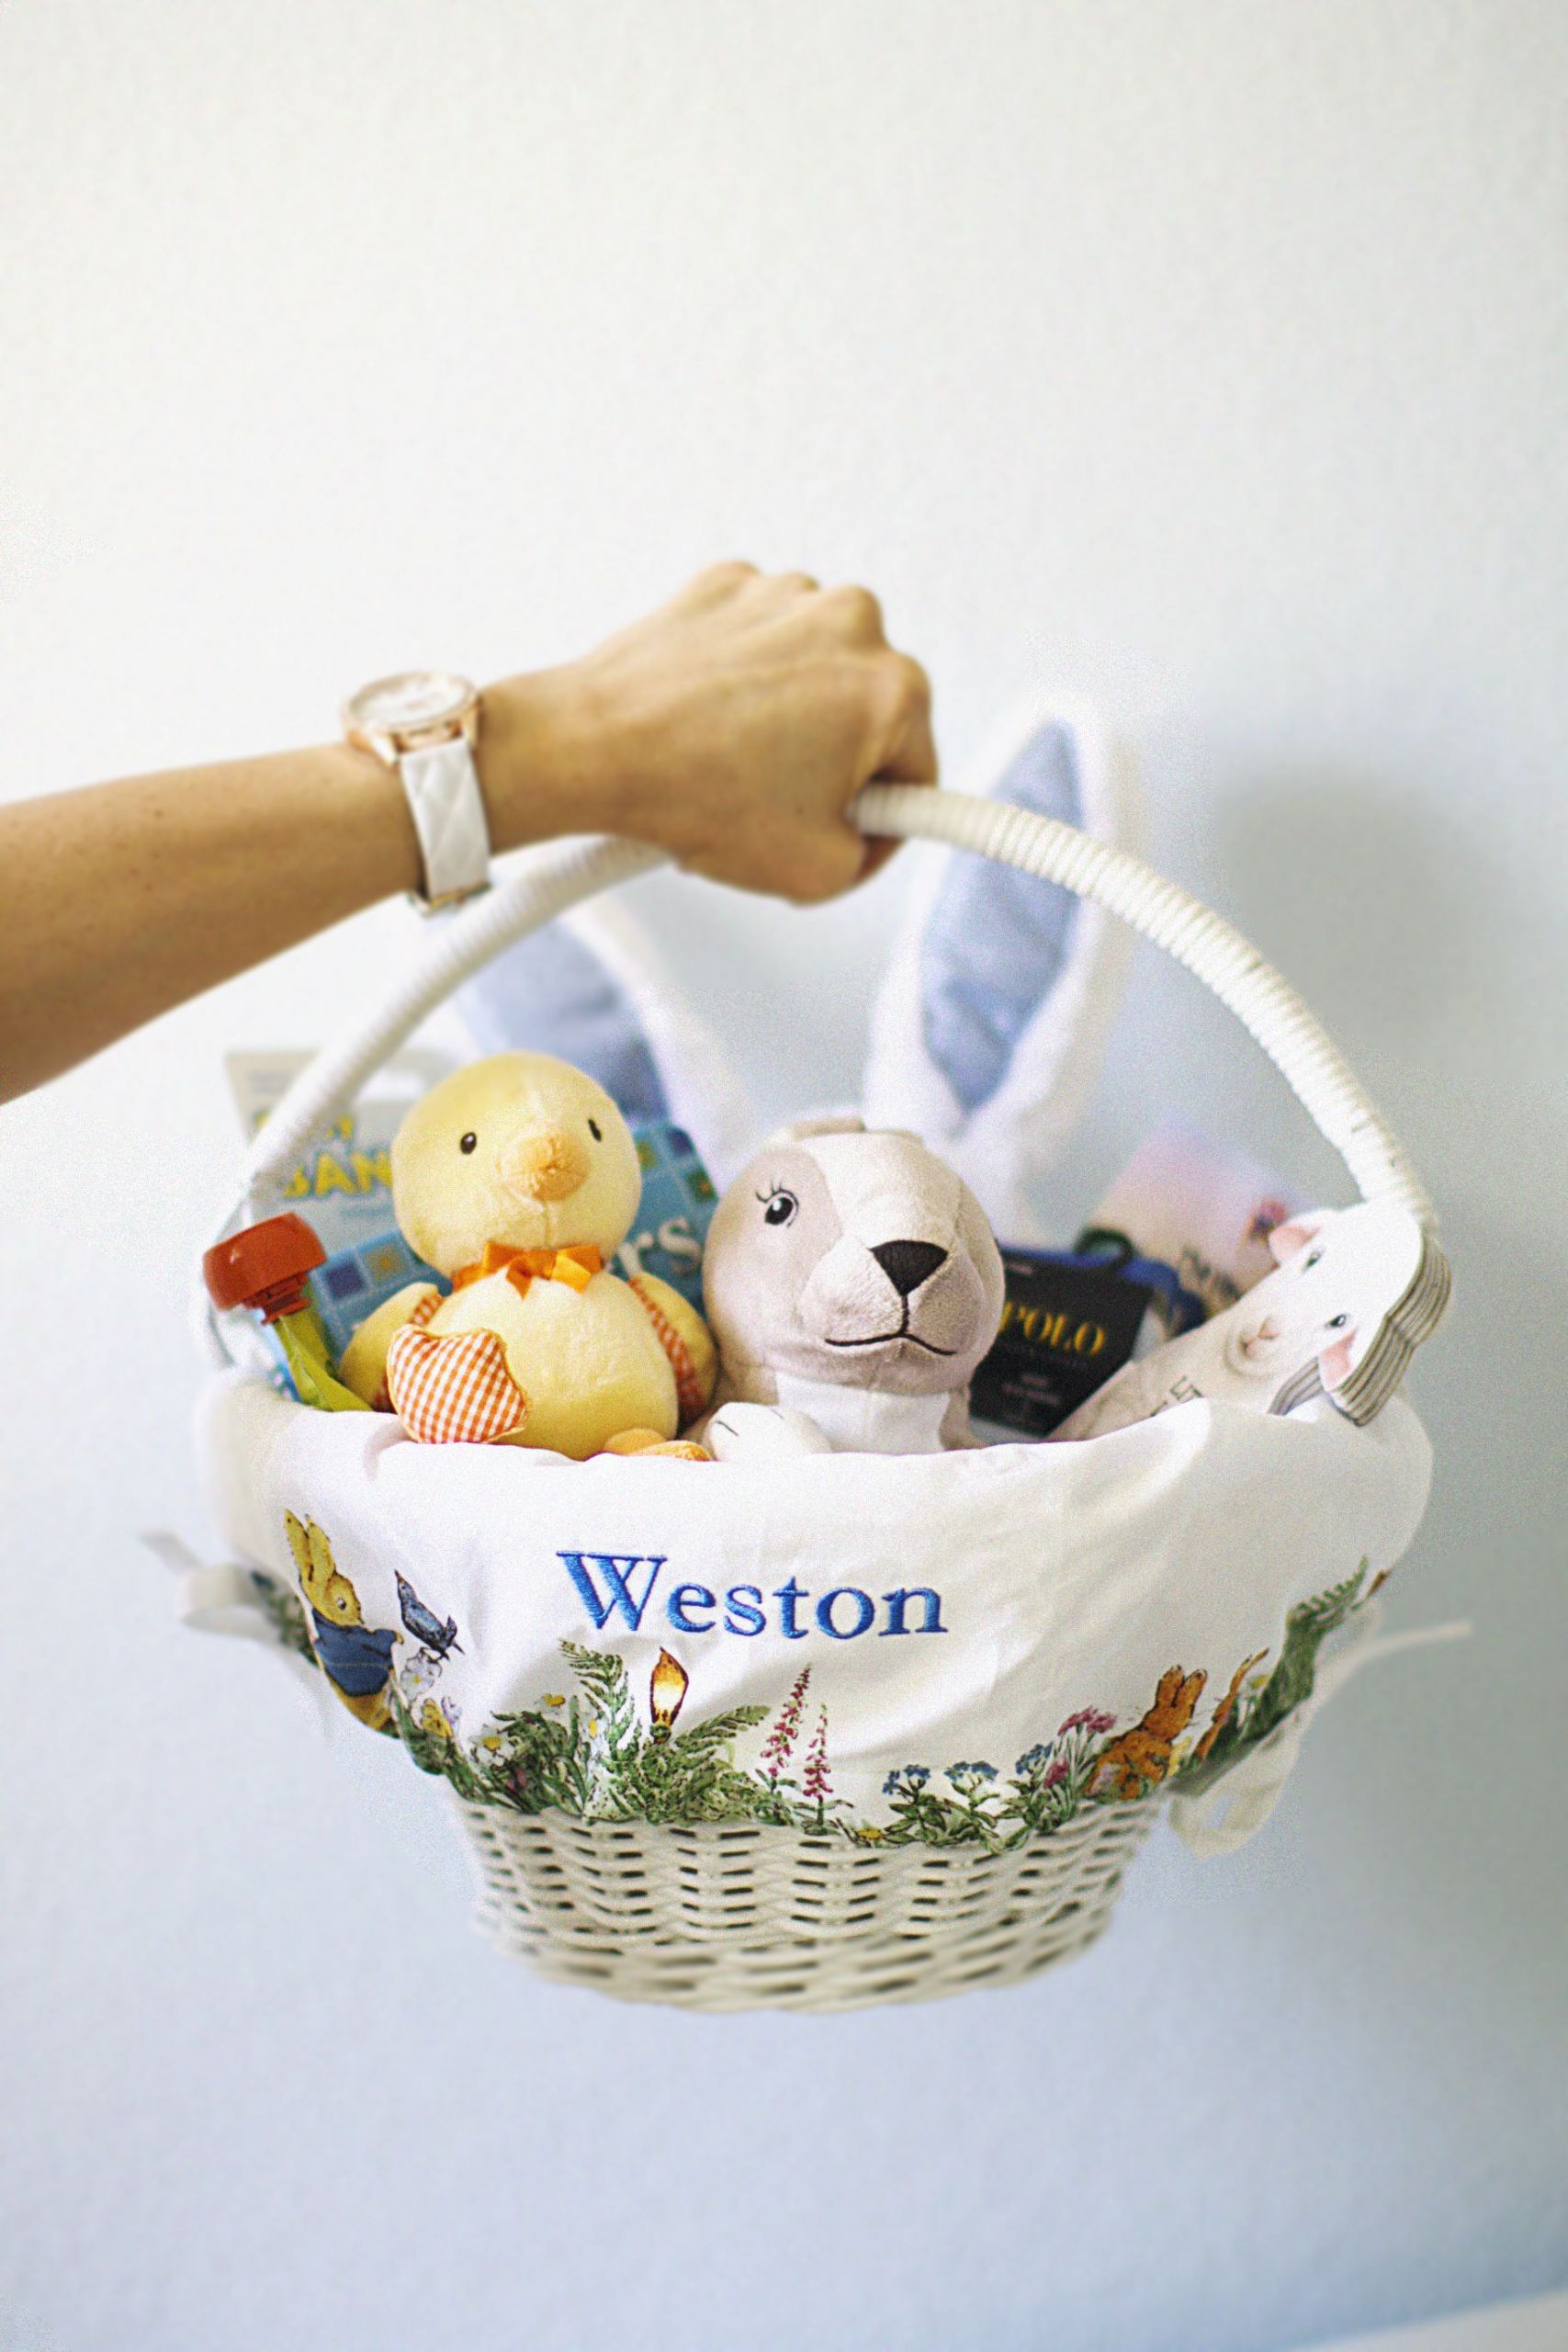 Baby Easter Baskets Ideas
 Adorable Easter basket ideas for babies